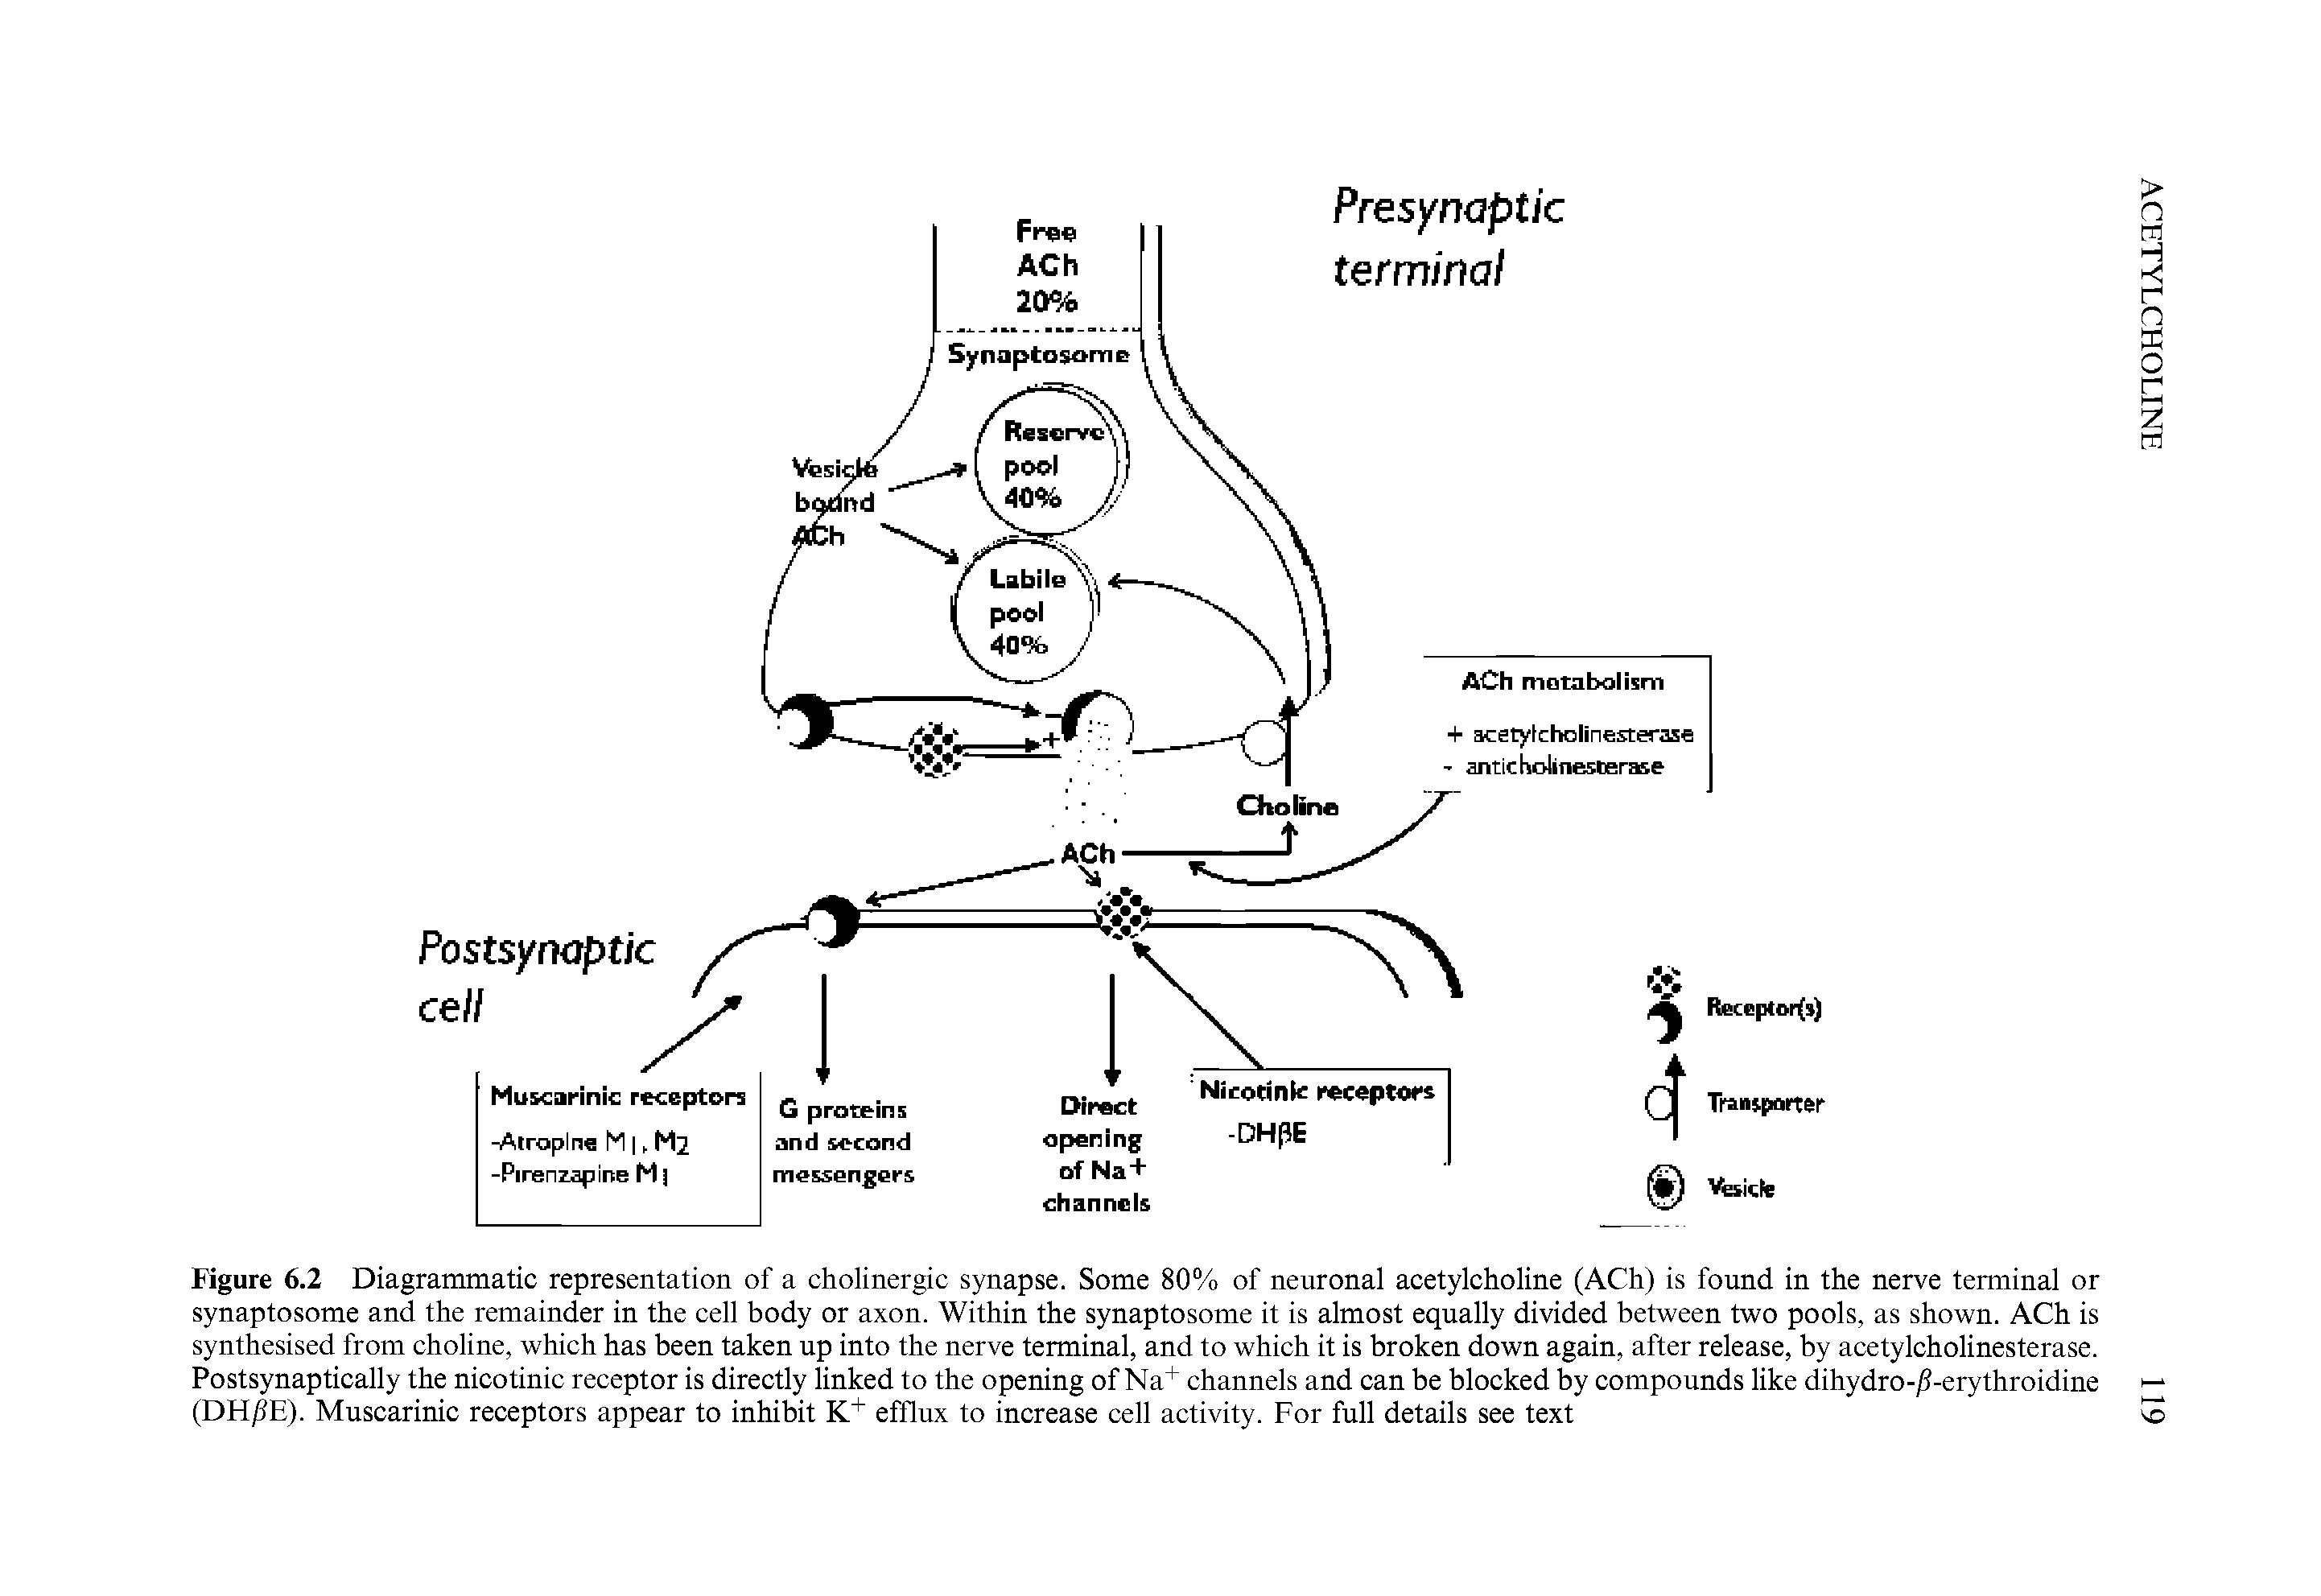 Figure 6.2 Diagrammatic representation of a cholinergic synapse. Some 80% of neuronal acetylcholine (ACh) is found in the nerve terminal or synaptosome and the remainder in the cell body or axon. Within the synaptosome it is almost equally divided between two pools, as shown. ACh is synthesised from choline, which has been taken up into the nerve terminal, and to which it is broken down again, after release, by acetylcholinesterase. Postsynaptically the nicotinic receptor is directly linked to the opening of Na+ channels and can be blocked by compounds like dihydro-jS-erythroidine (DH/IE). Muscarinic receptors appear to inhibit K+ efflux to increase cell activity. For full details see text...